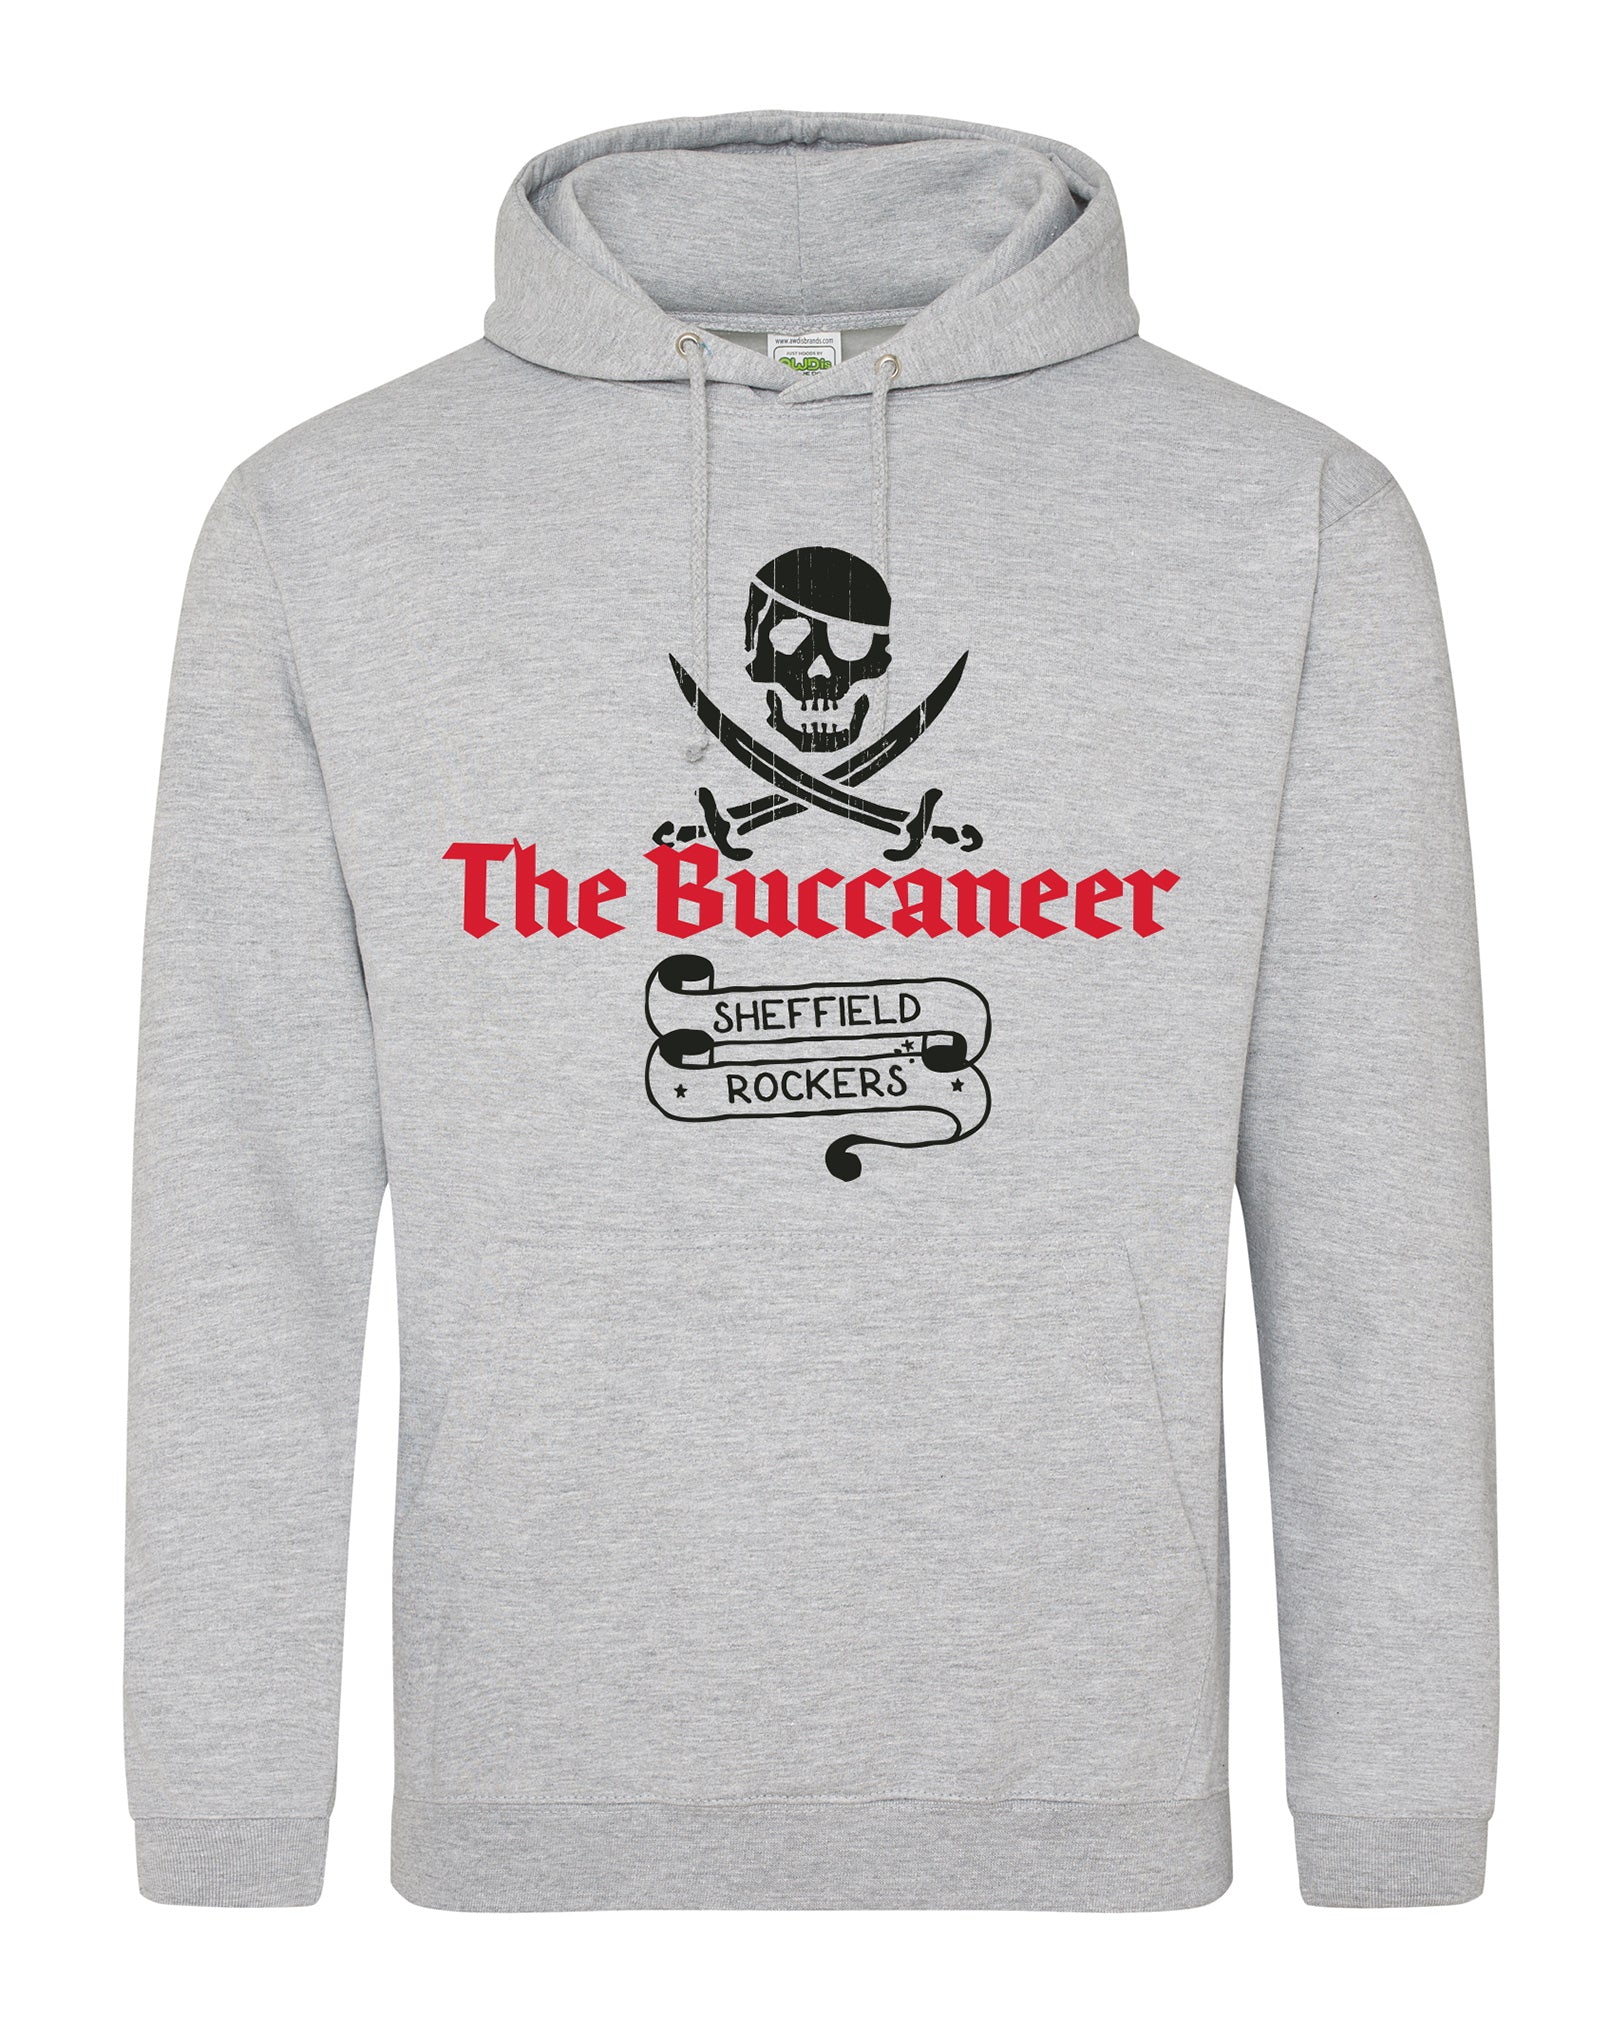 Buccaneer unisex fit hoodie - various colours - Dirty Stop Outs